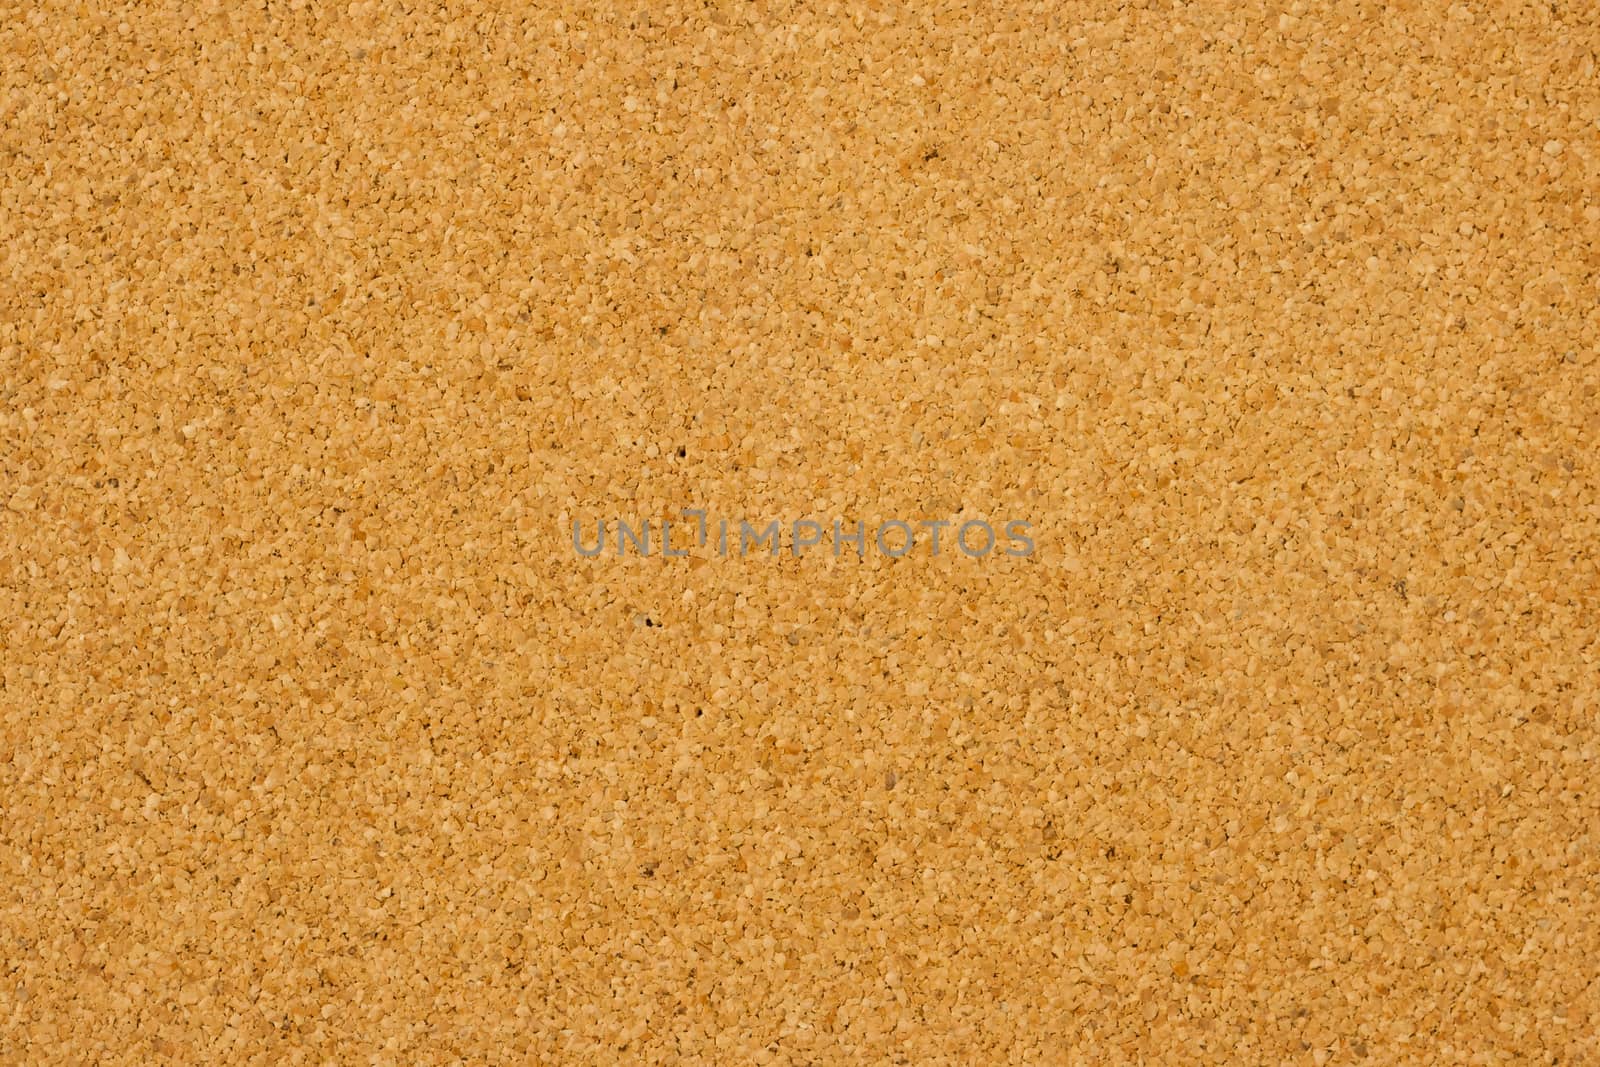 surface texture of a corkboard background detail close-up